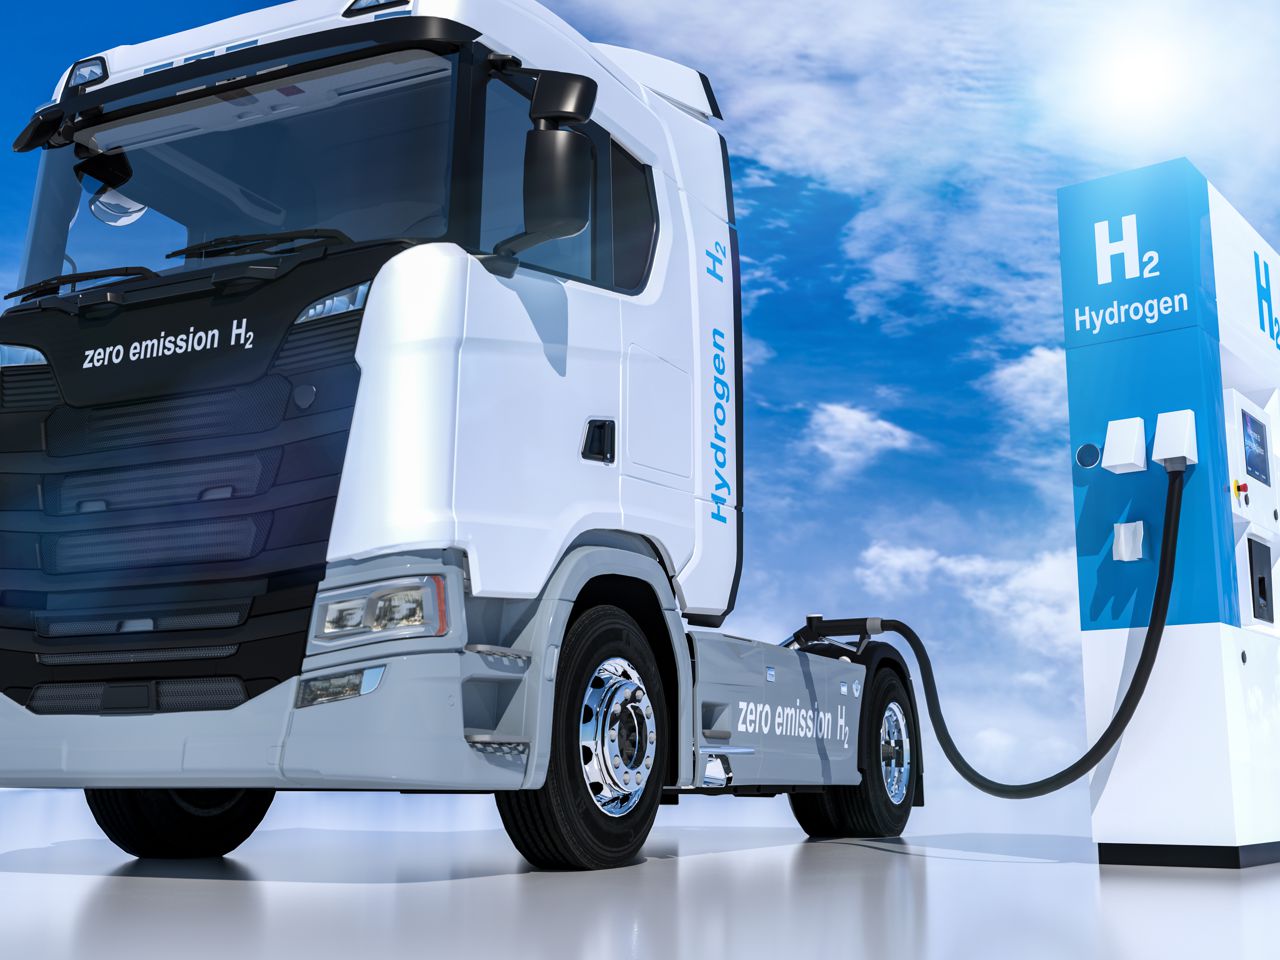 [Translate to Englisch:] Truck at fuel filling station with hydrogen symbol